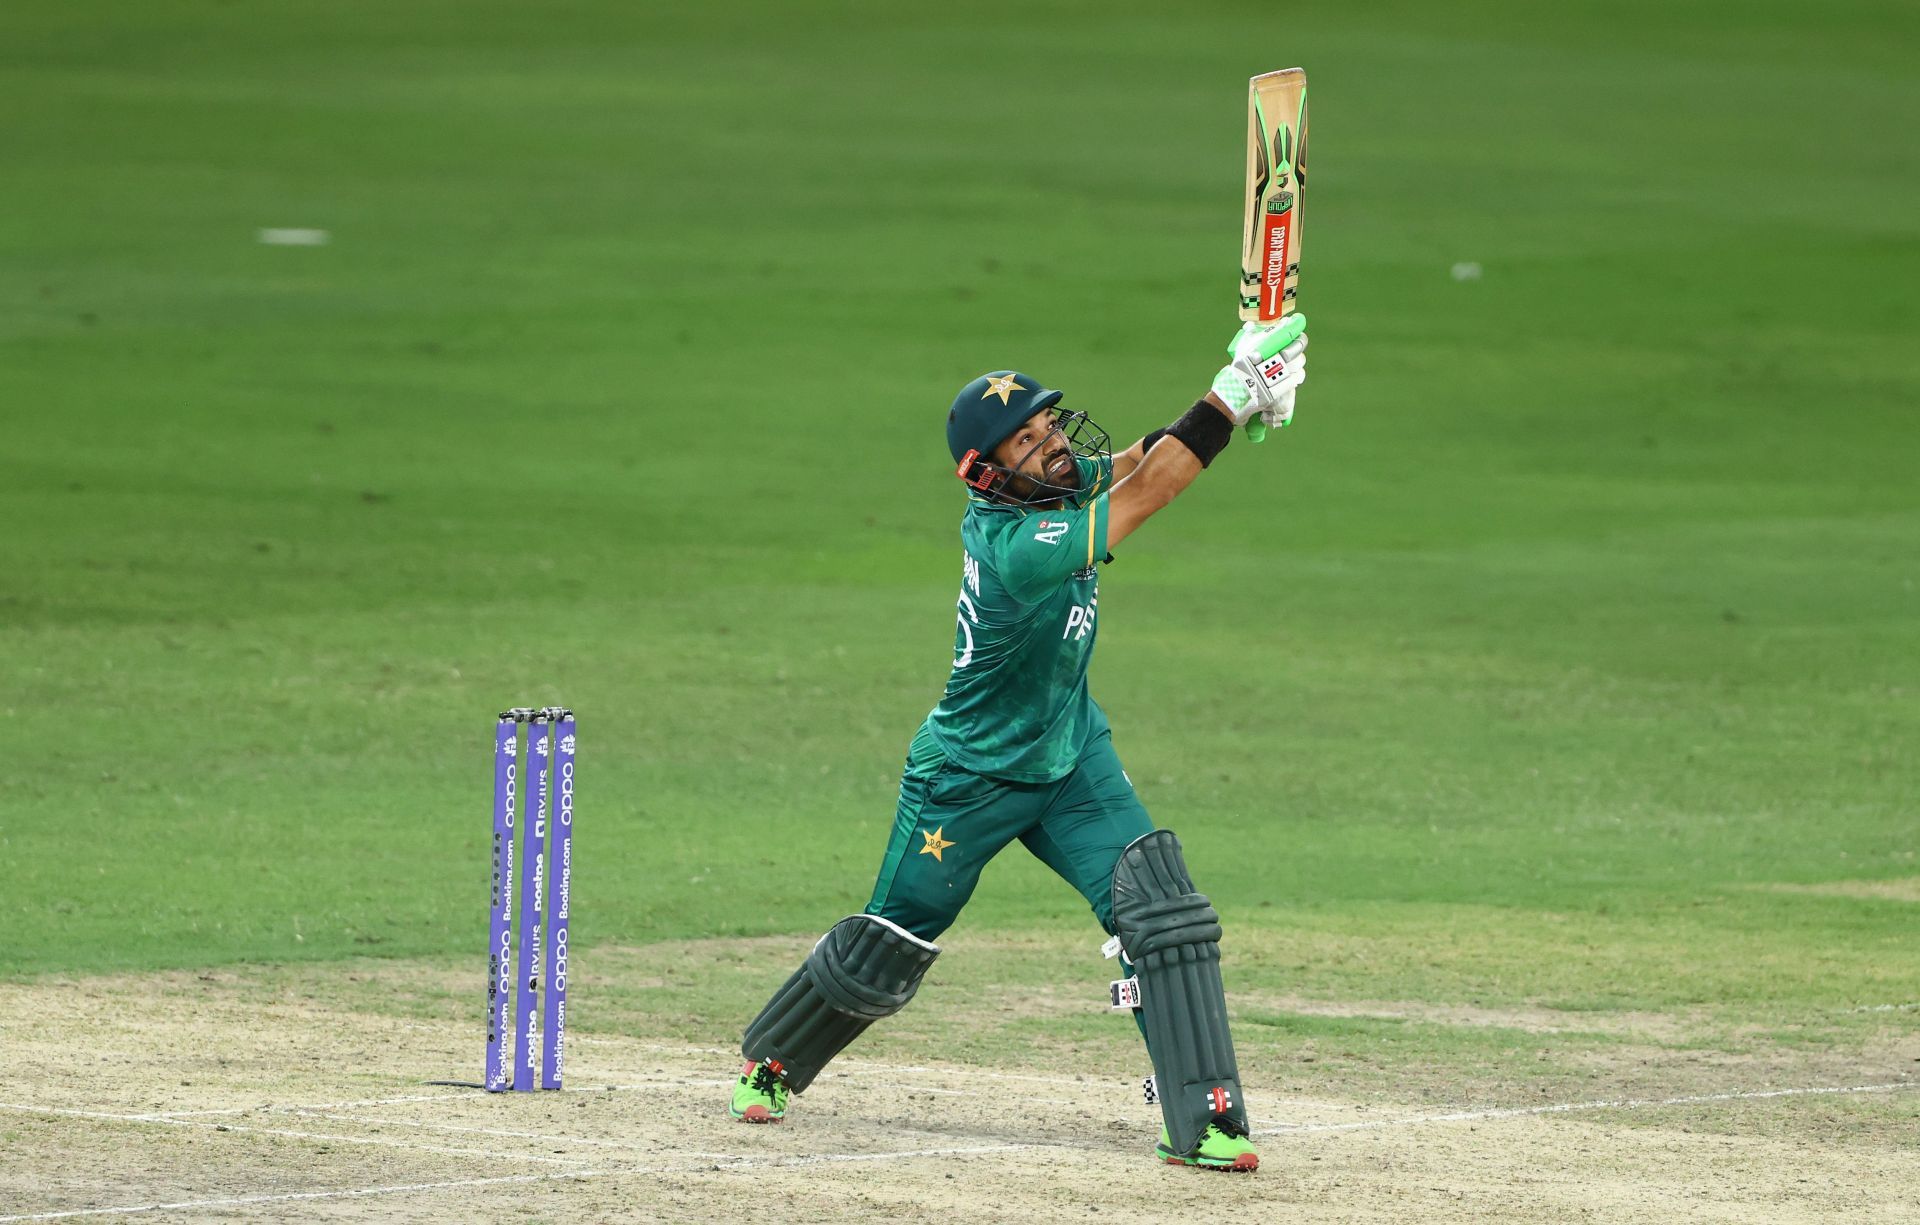 Rizwan battled several obstacles to play against Australia